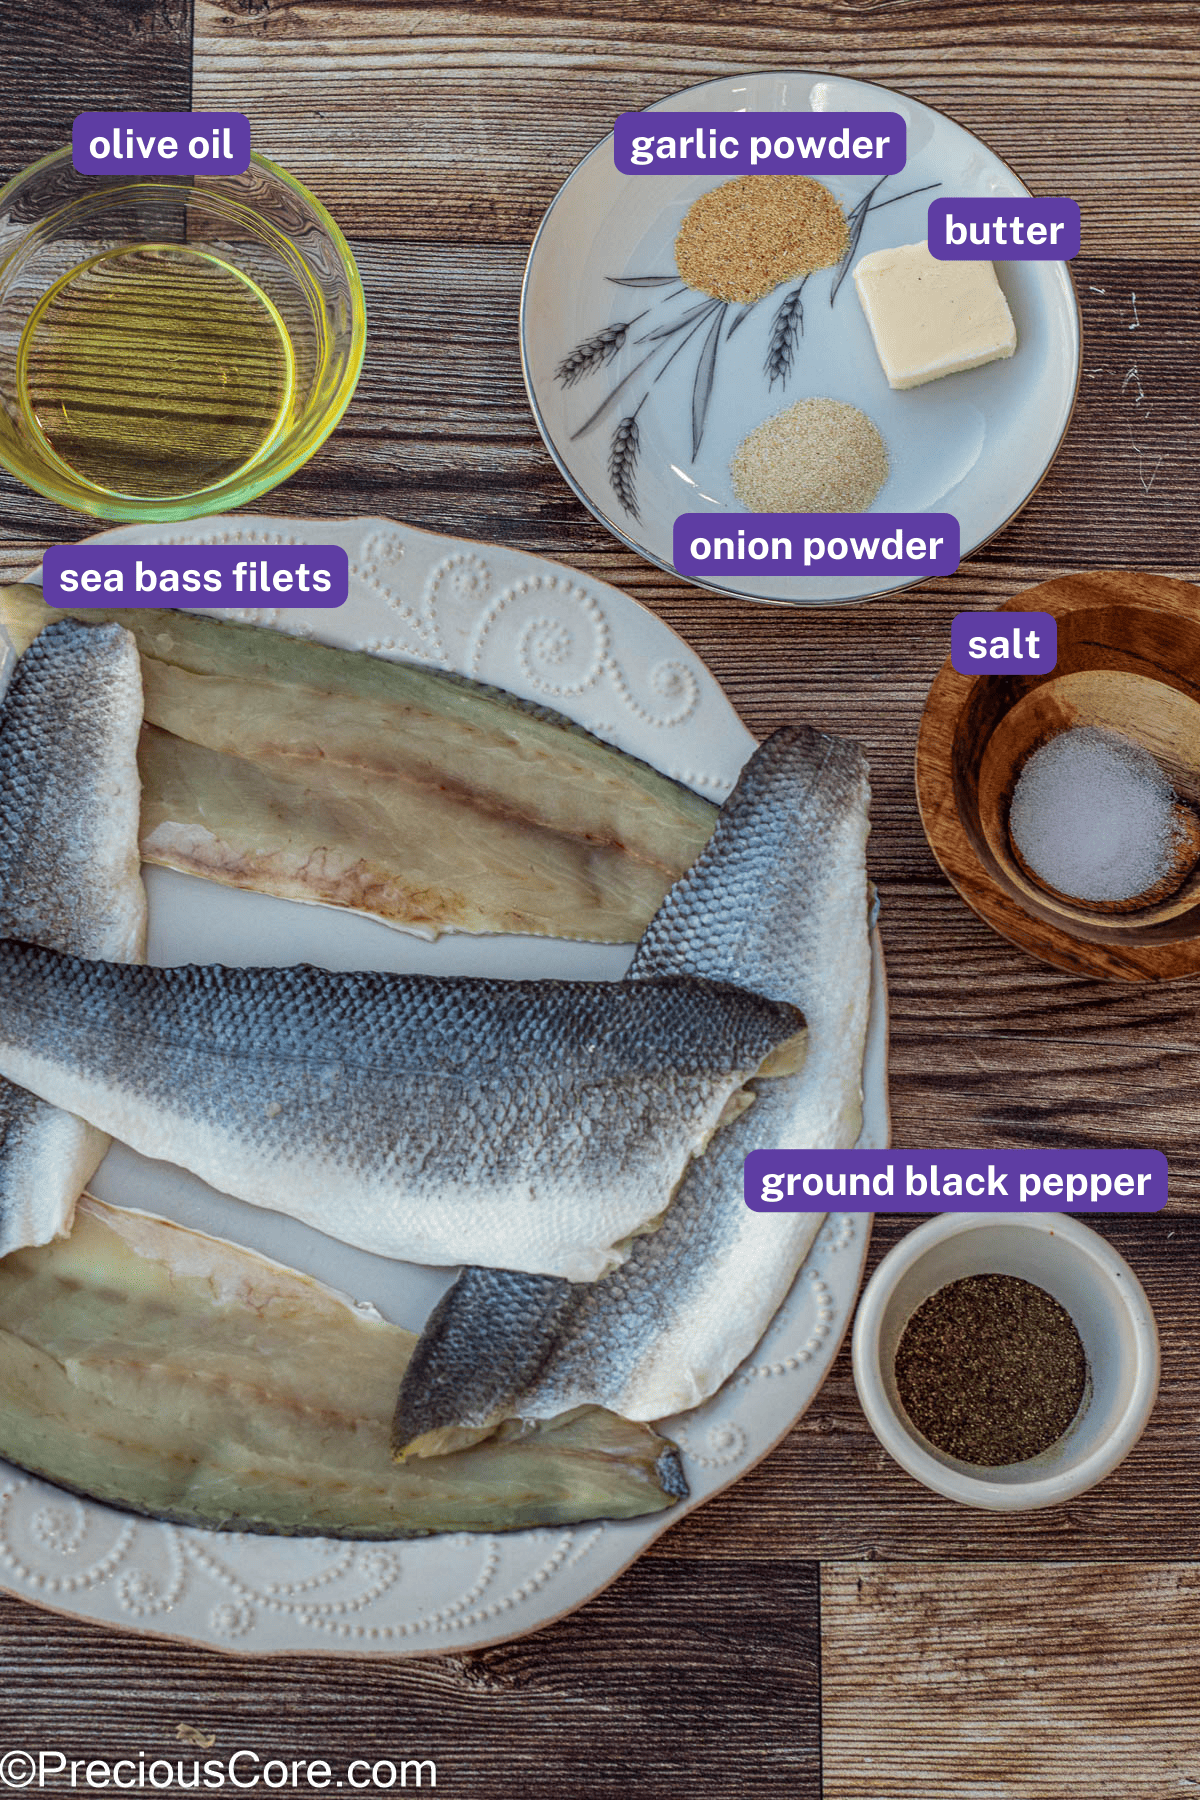 Ingredients for Pan Seared Sea Bass with labels.